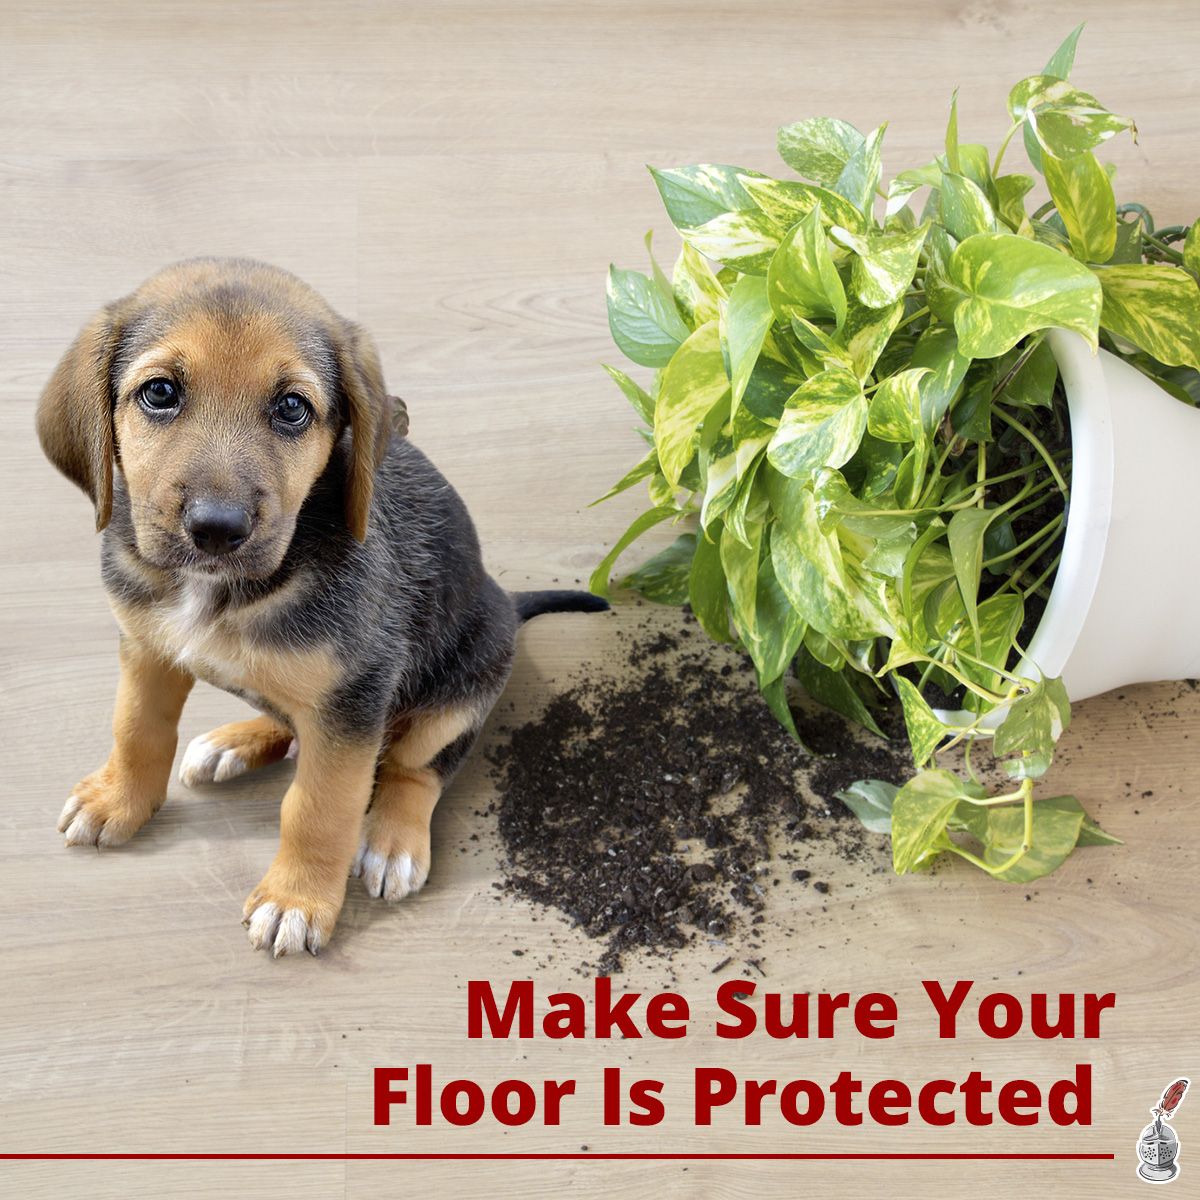 Make Sure Your Floor is Protected